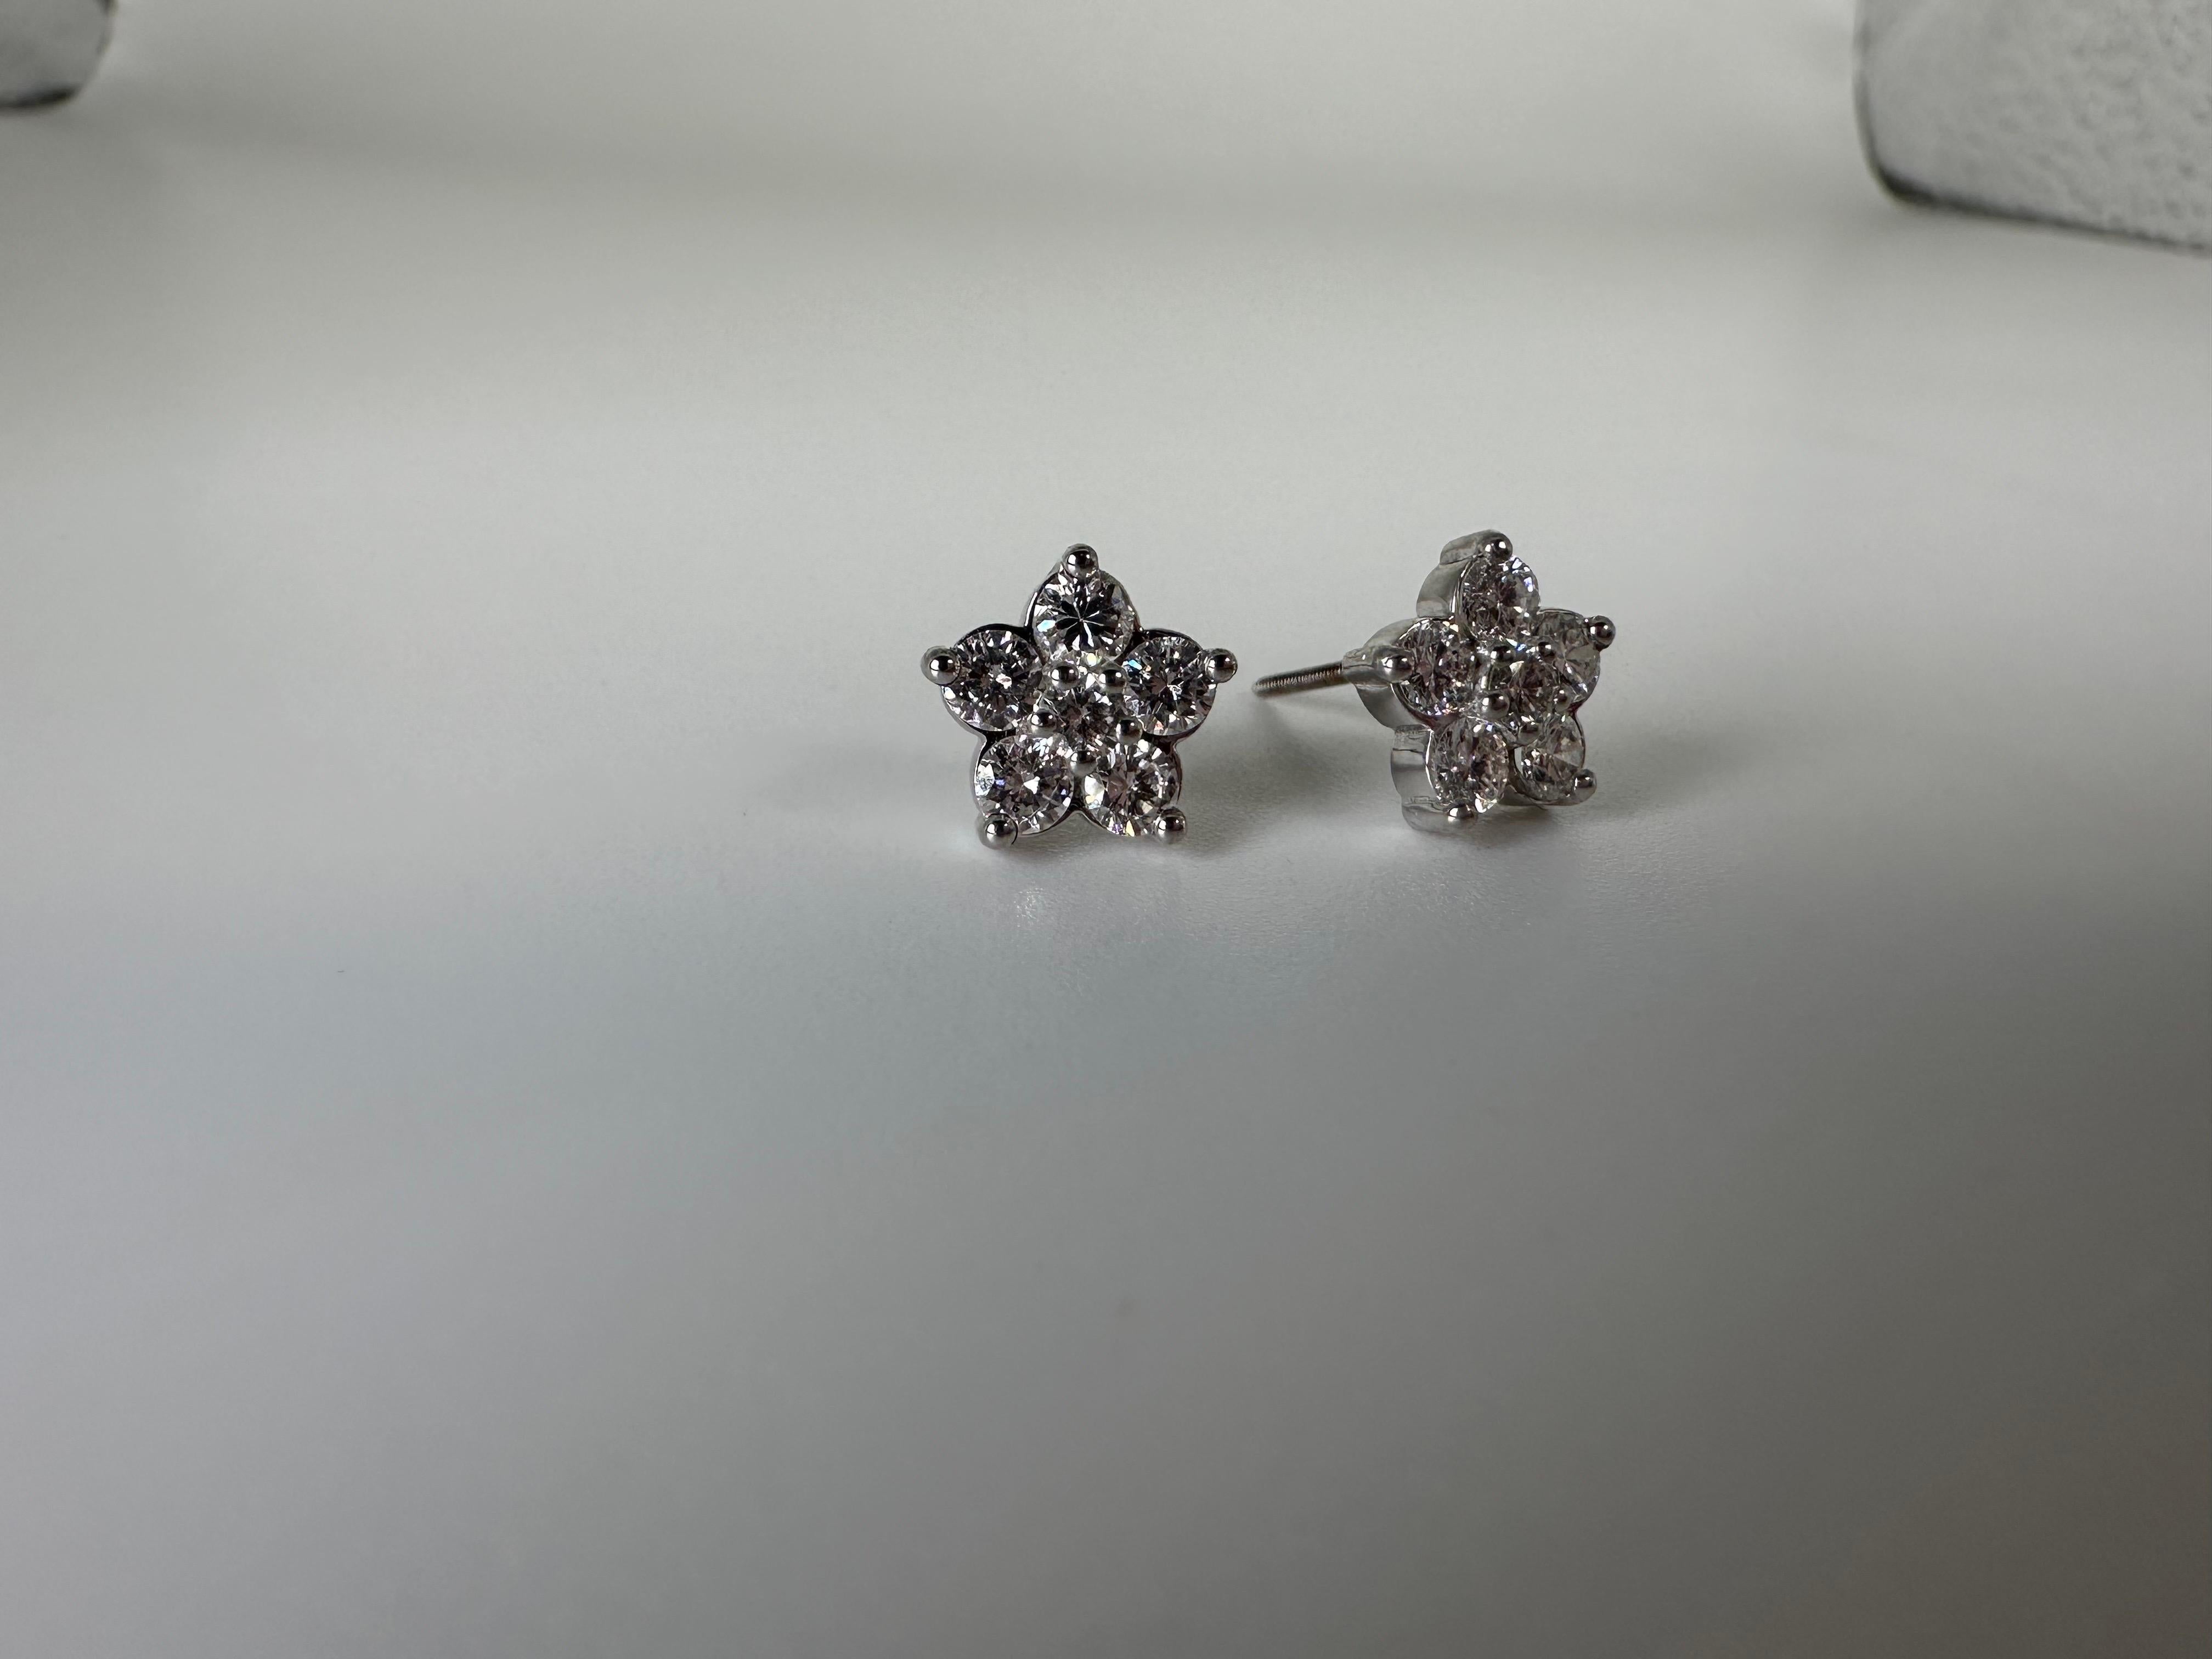 
Cute diamond earrings, simple elegant and luxurious, so perfect for everyday wear or a night out!

CENTER STONE: NATURAL DIAMONDS
CARAT: 1.00CT
CLARITY: SI
COLOR: G
CUT: ROUND BRILLIANT

GRAM WEIGHT: 2.35gr
GOLD: 14KT white gold
CLOSURE: screw